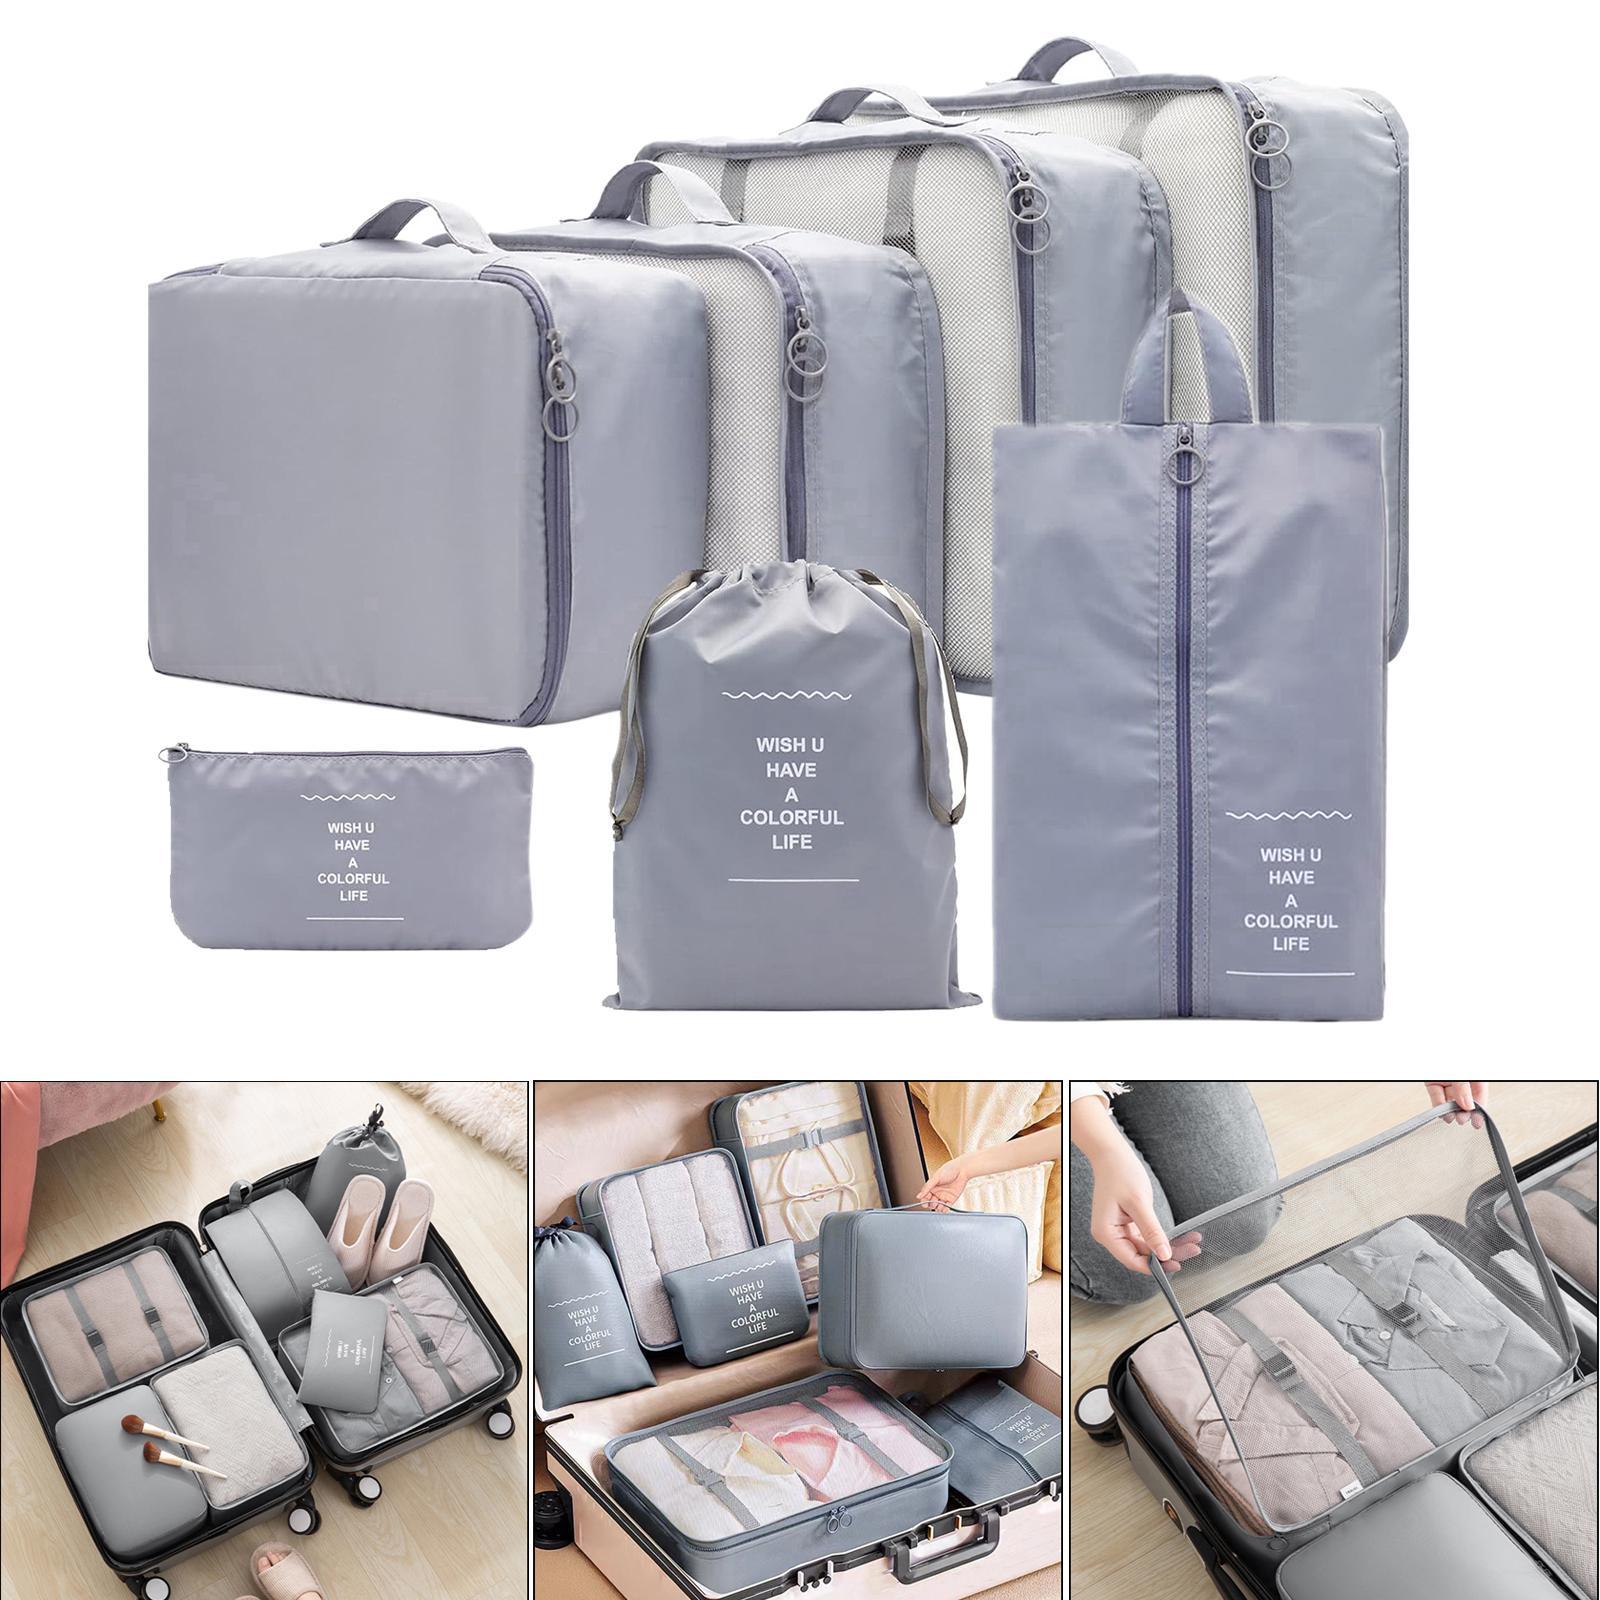 7Pcs Portable Packing Cubes Travel Organizers Lightweight Shoes Bag Luggage Packing Organizers for Luggage Toiletries Clothes